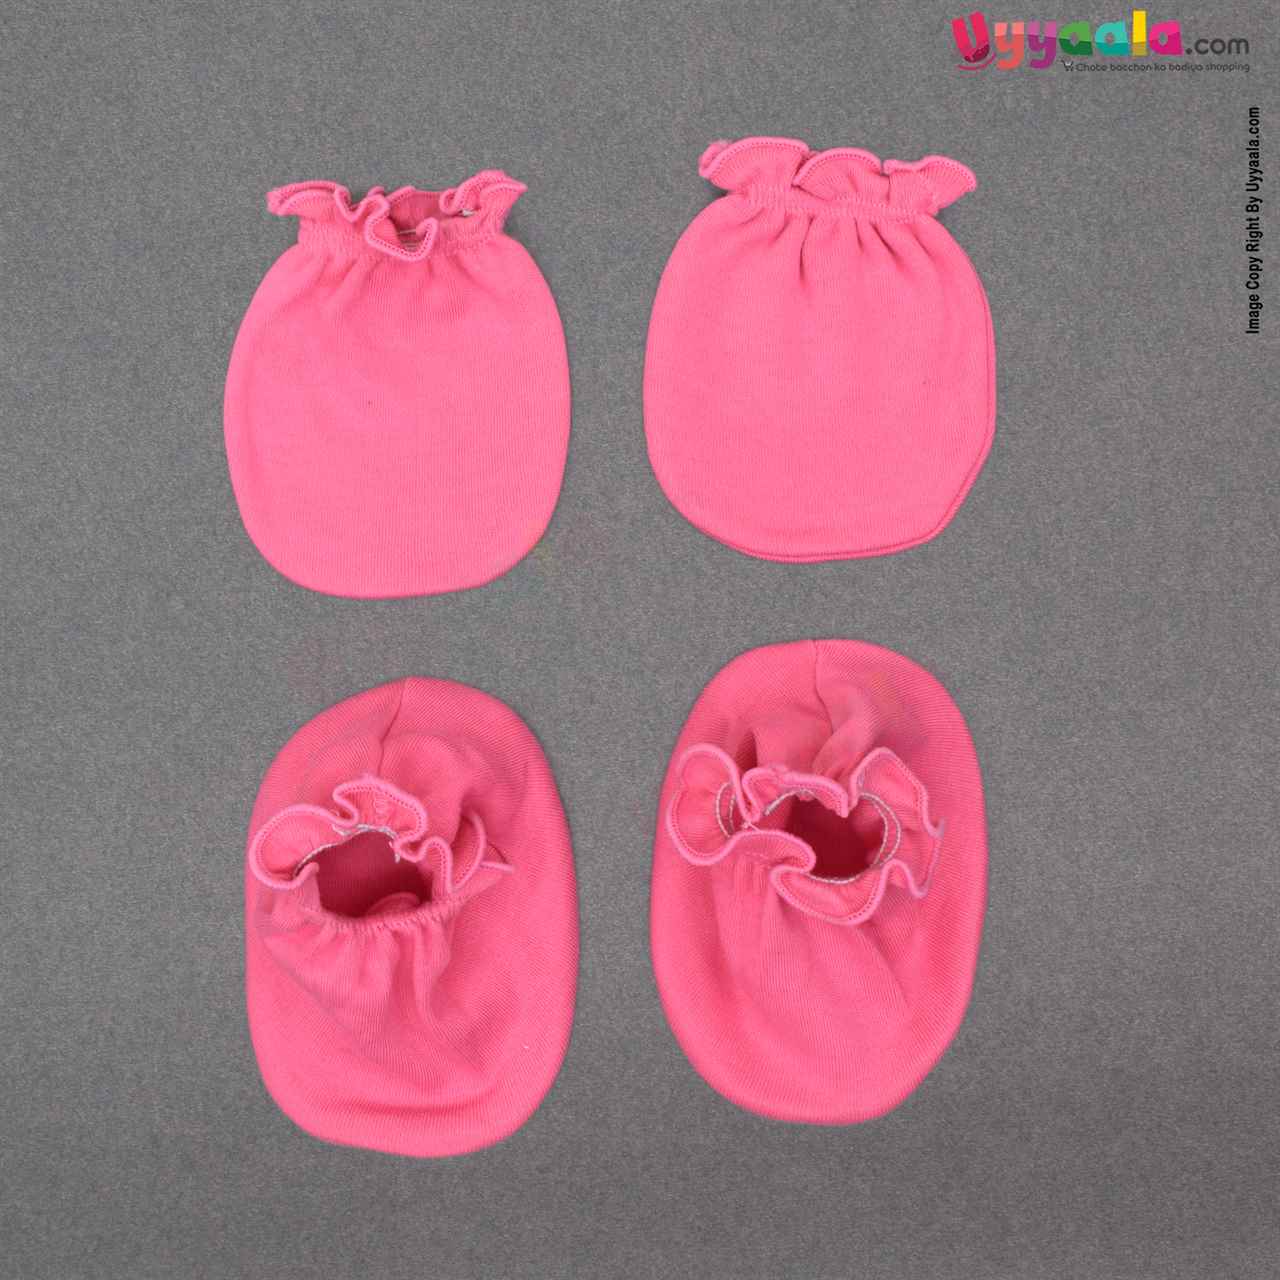 Mittens & Booties Set For Babies - Pink 0-3m Pack of 4